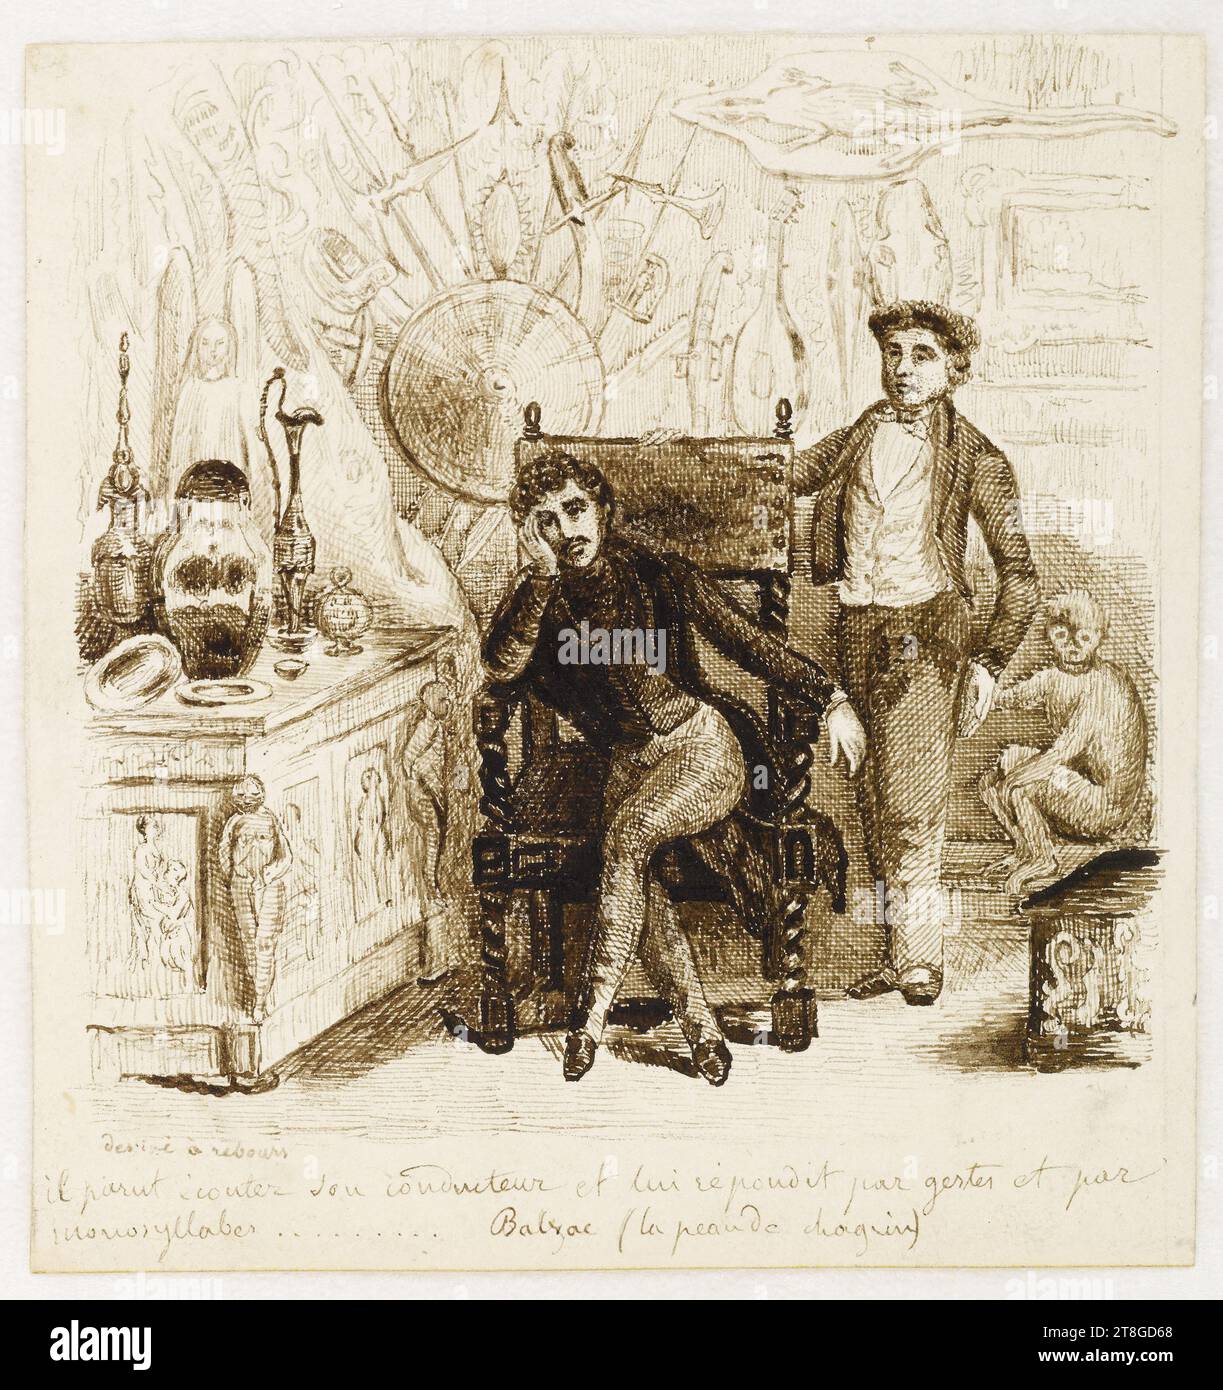 Raphaël de Valentin meditating on the antiquities presented by the young antiquarian, Draughtsman, Janet, Ange-Louis (dit Janet-Lange), Draughtsman, Langlois, Philibert, Engraver, In 1838, 19th century, Graphic arts, Drawing, Ink, Vellum, Dimensions - Image:, Height: 11.3 cm, Width: 10.6 cm Stock Photo